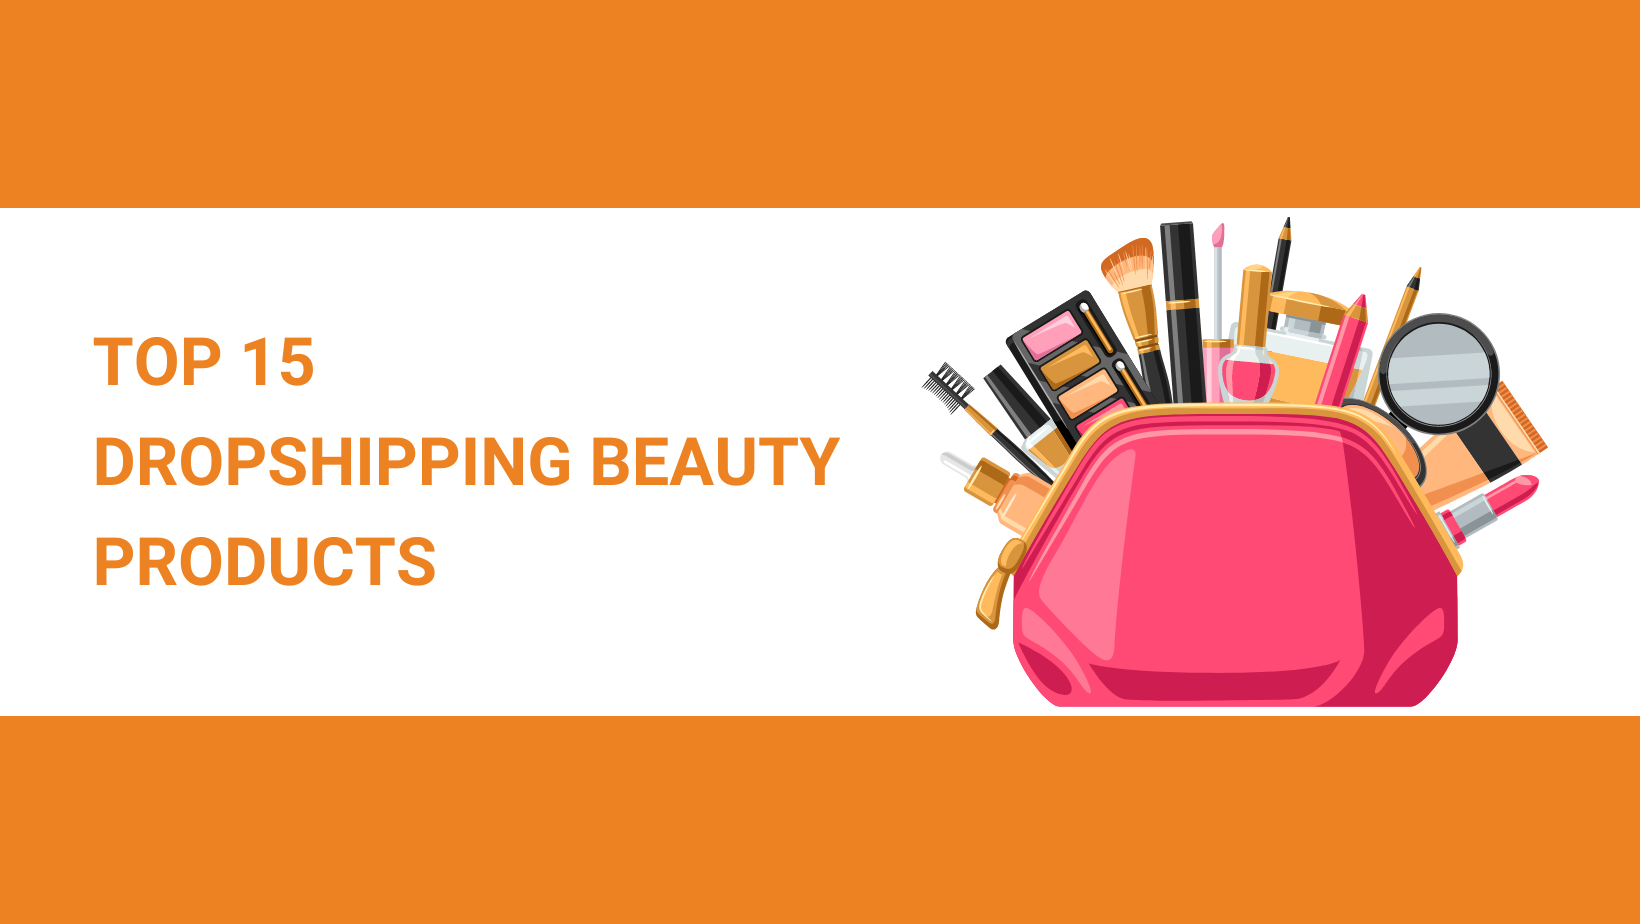 TOP 15 DROPSHIPPING BEAUTY PRODUCTS